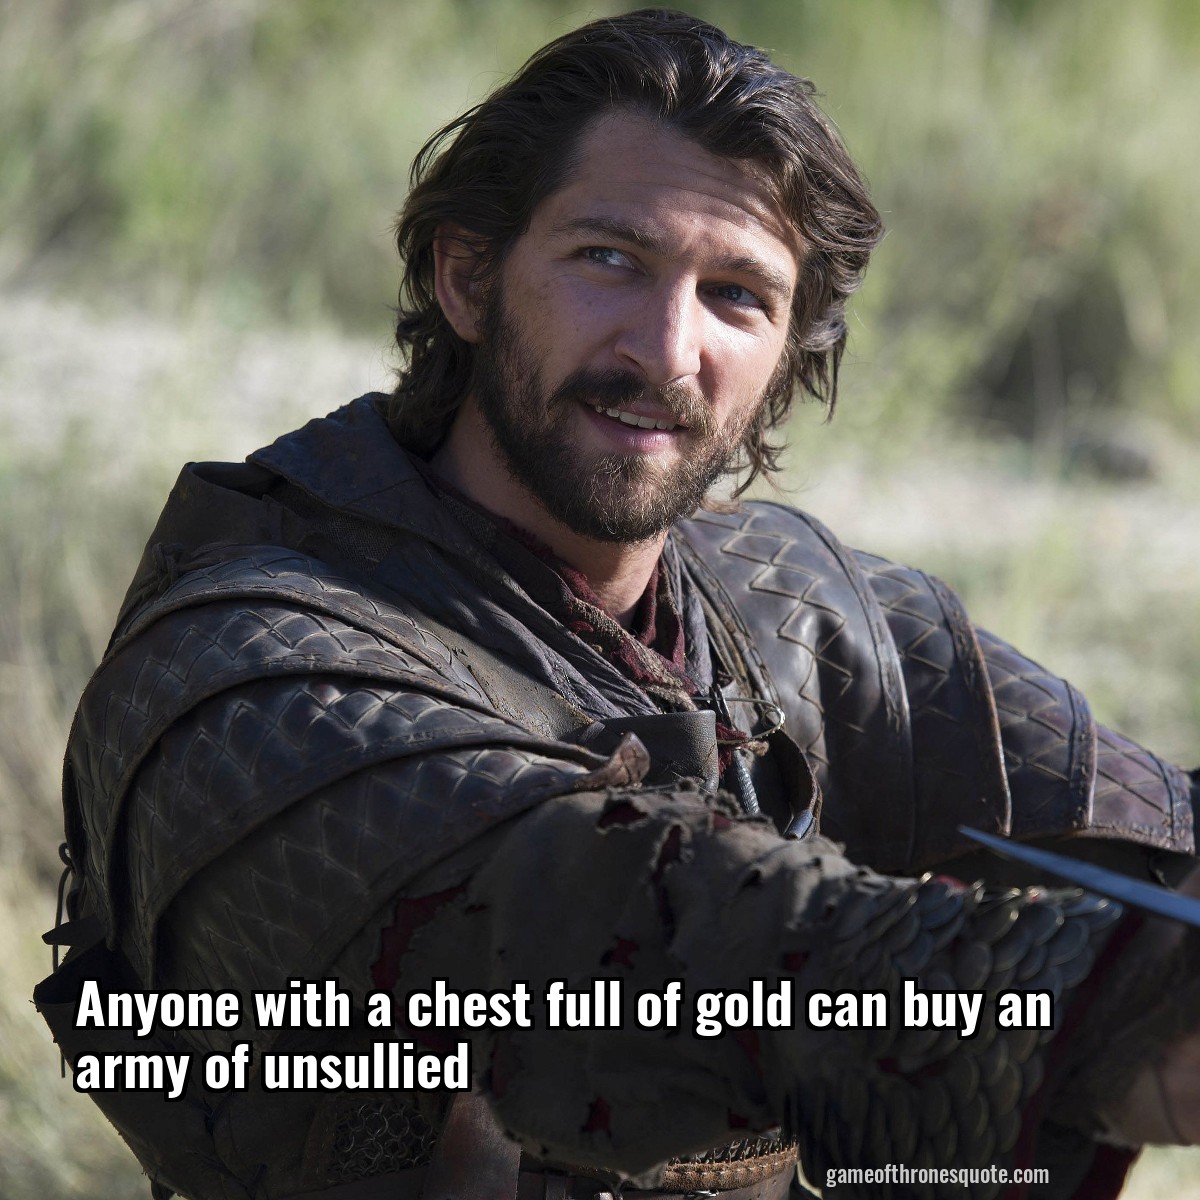 Anyone with a chest full of gold can buy an army of unsullied